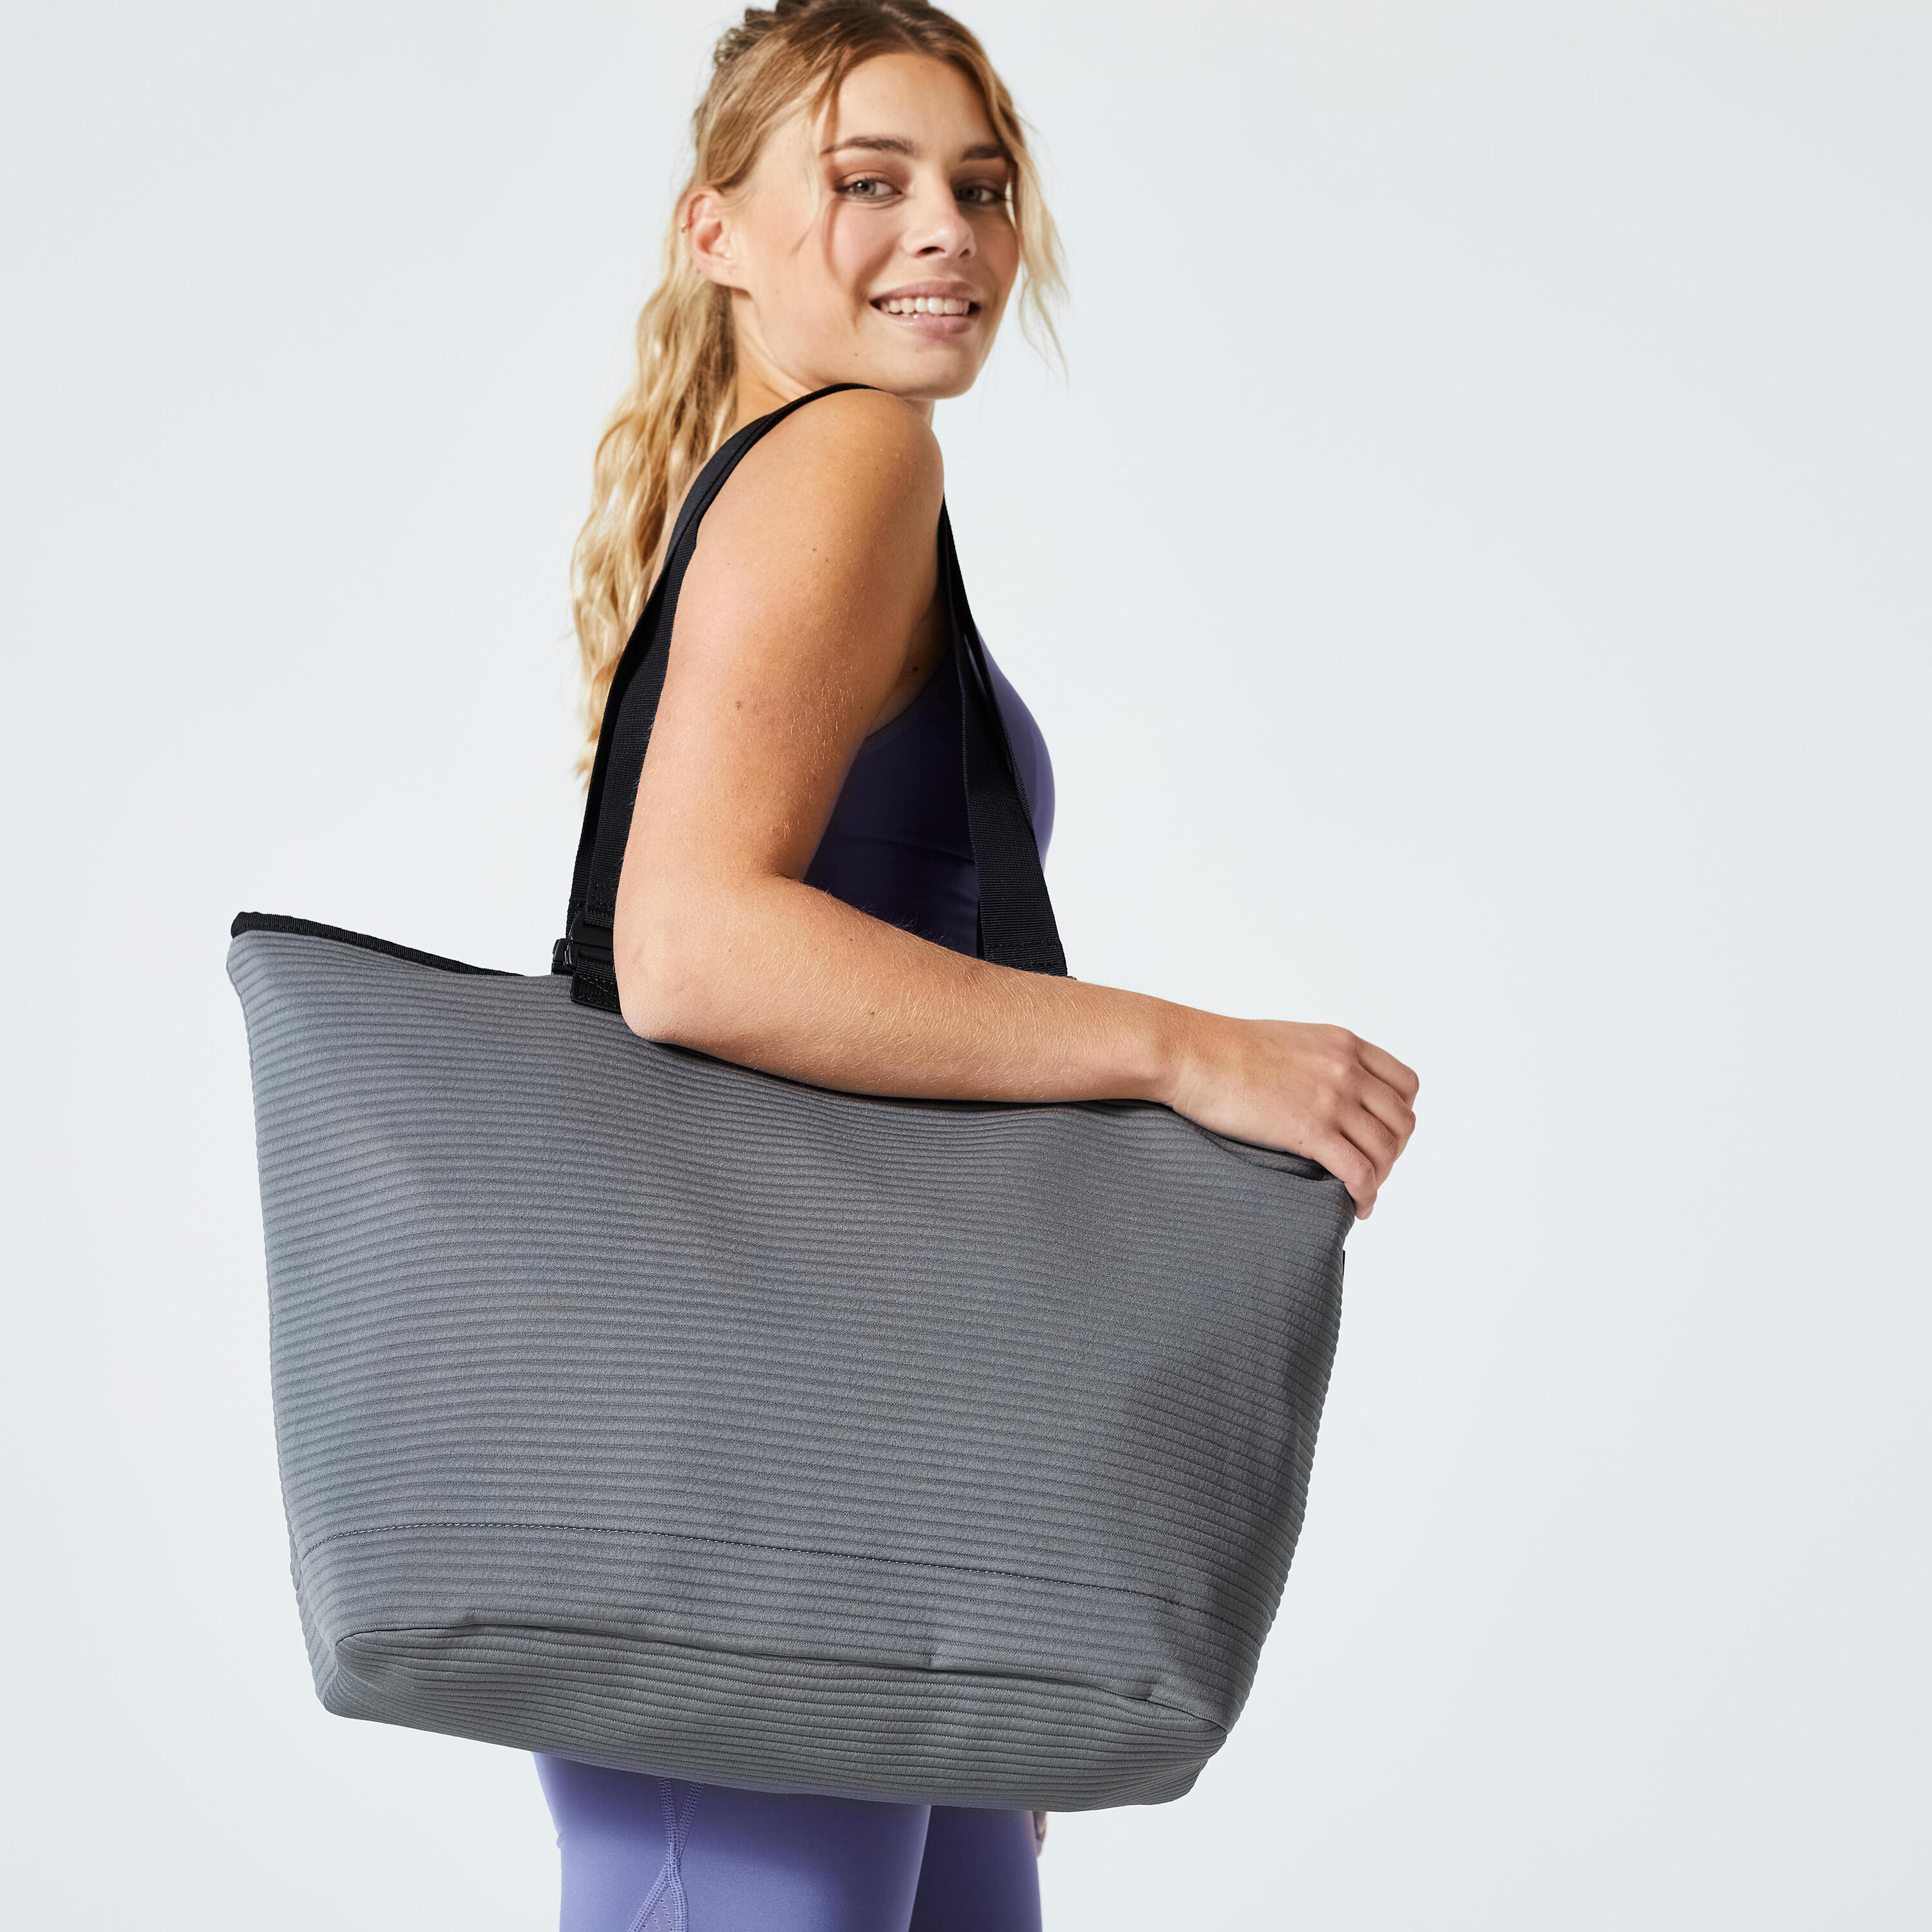 Reversible Sports' Tote 25L - Grey/Off-White 4/7